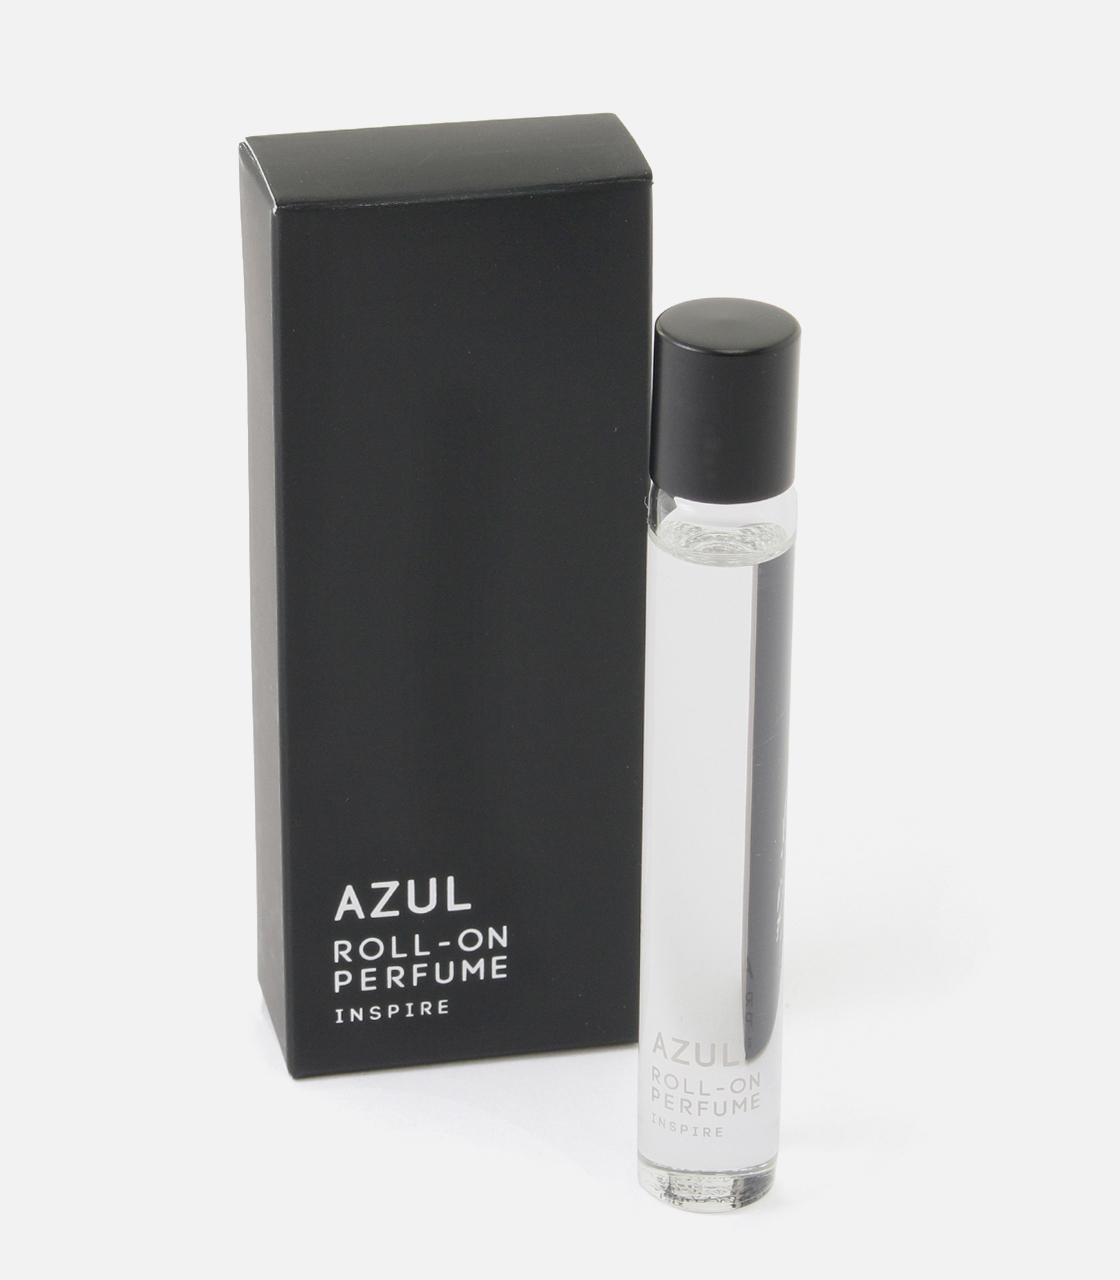 Azul Roll On Perfume アズールロールオンパフューム Azul By Moussy アズールバイマウジー 公式通販サイト